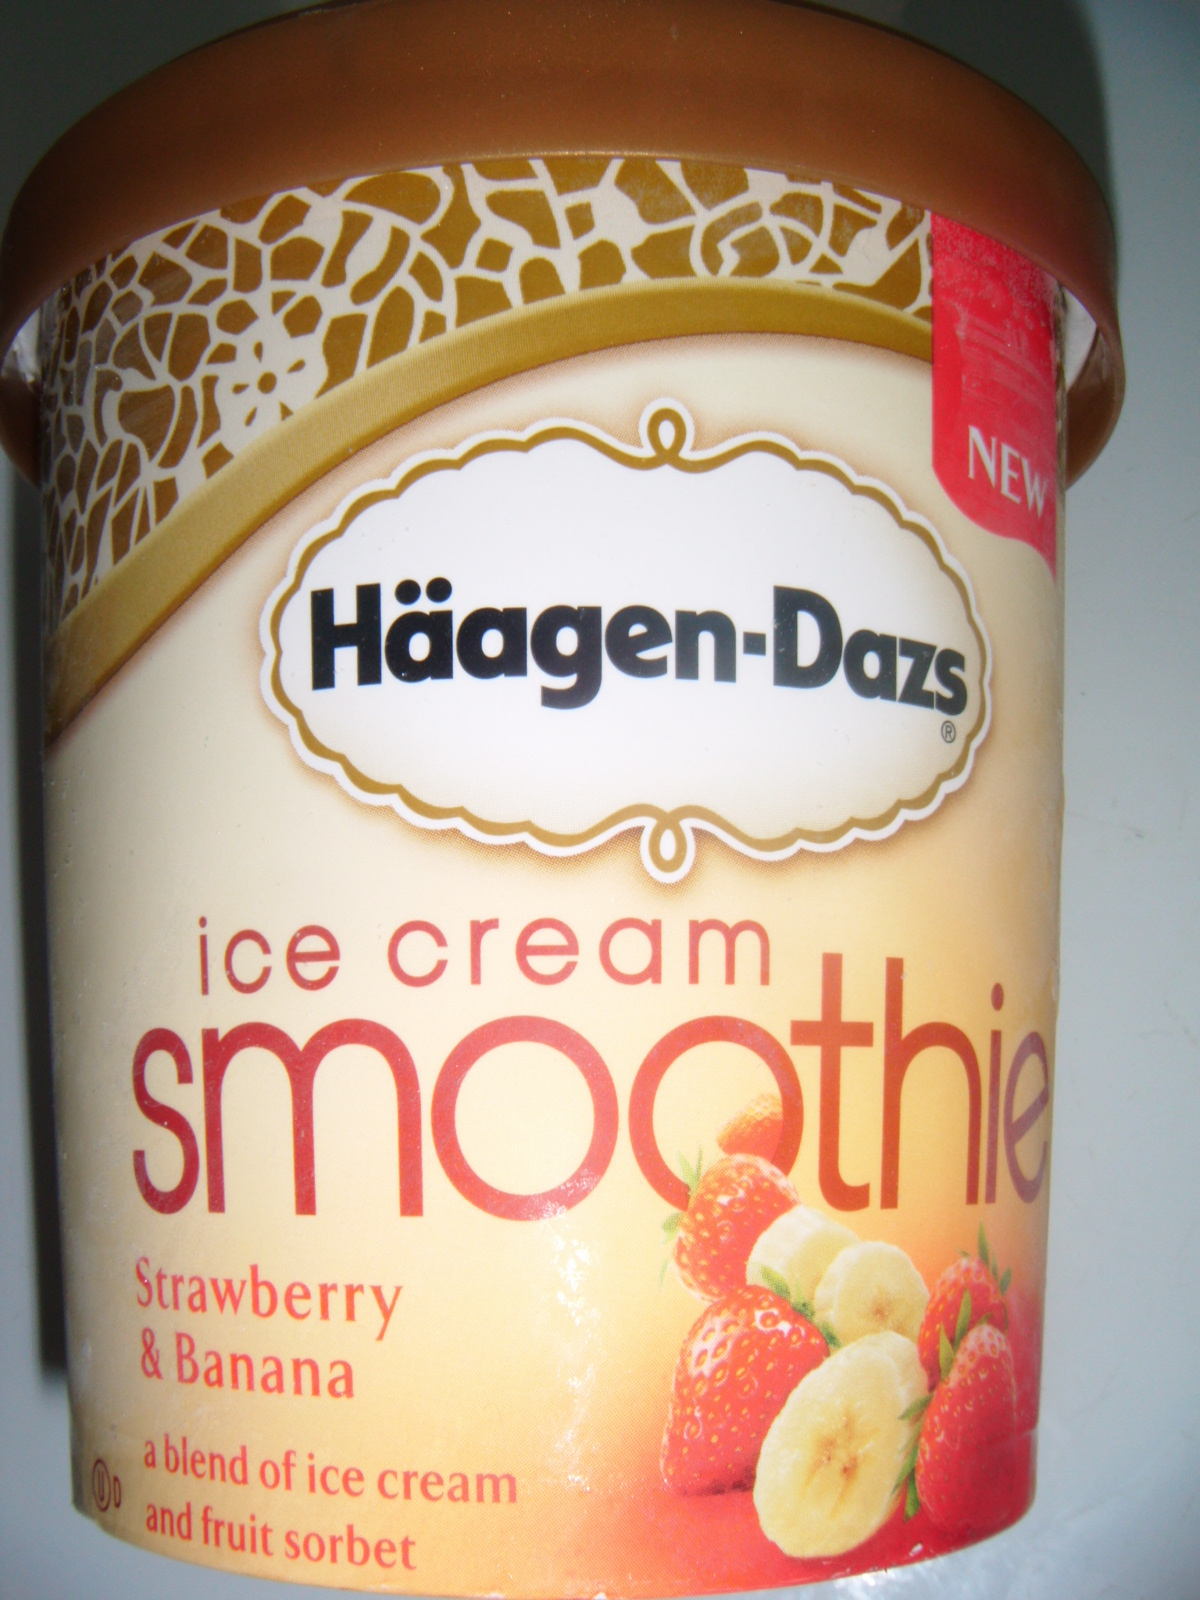 FOODSTUFF FINDS HaagenDaz Ice Cream Smoothie [Strawberry and Banana